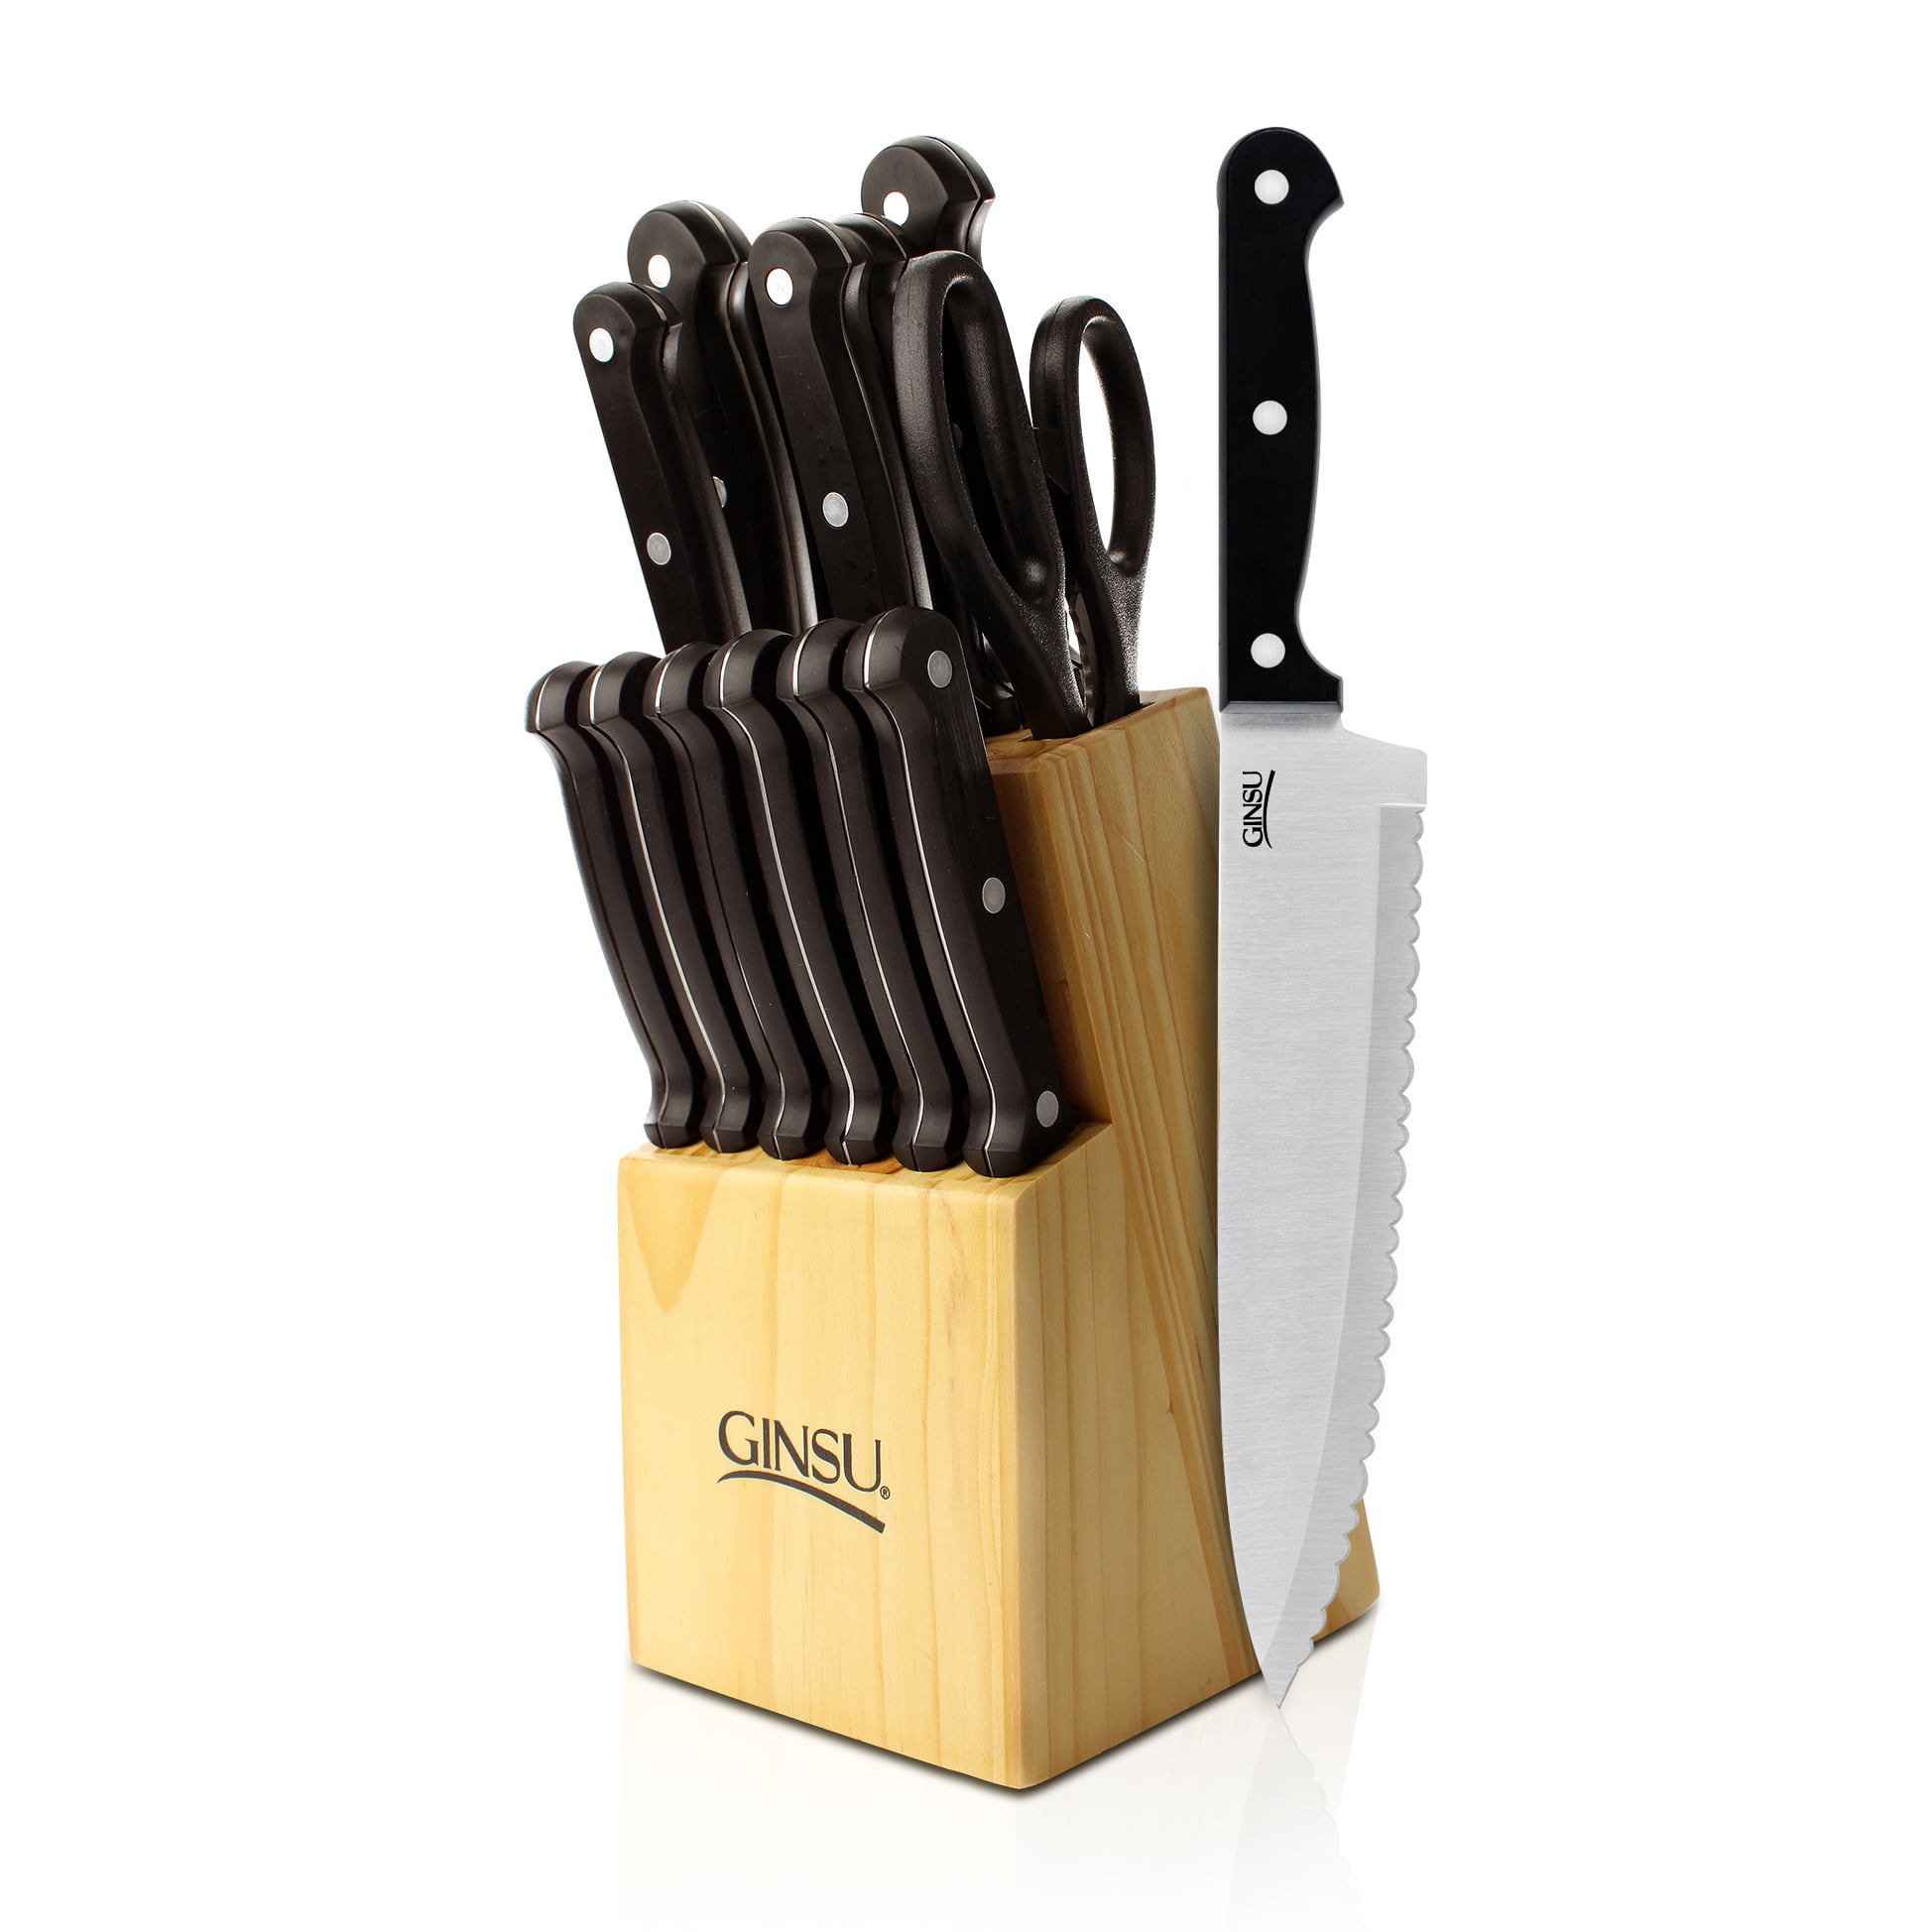 Ginsu Essential Series 14-Piece Stainless Steel Serrated Knife Set –  Cutlery Set with Purple Kitchen Knives in a Black Block, 03891DS